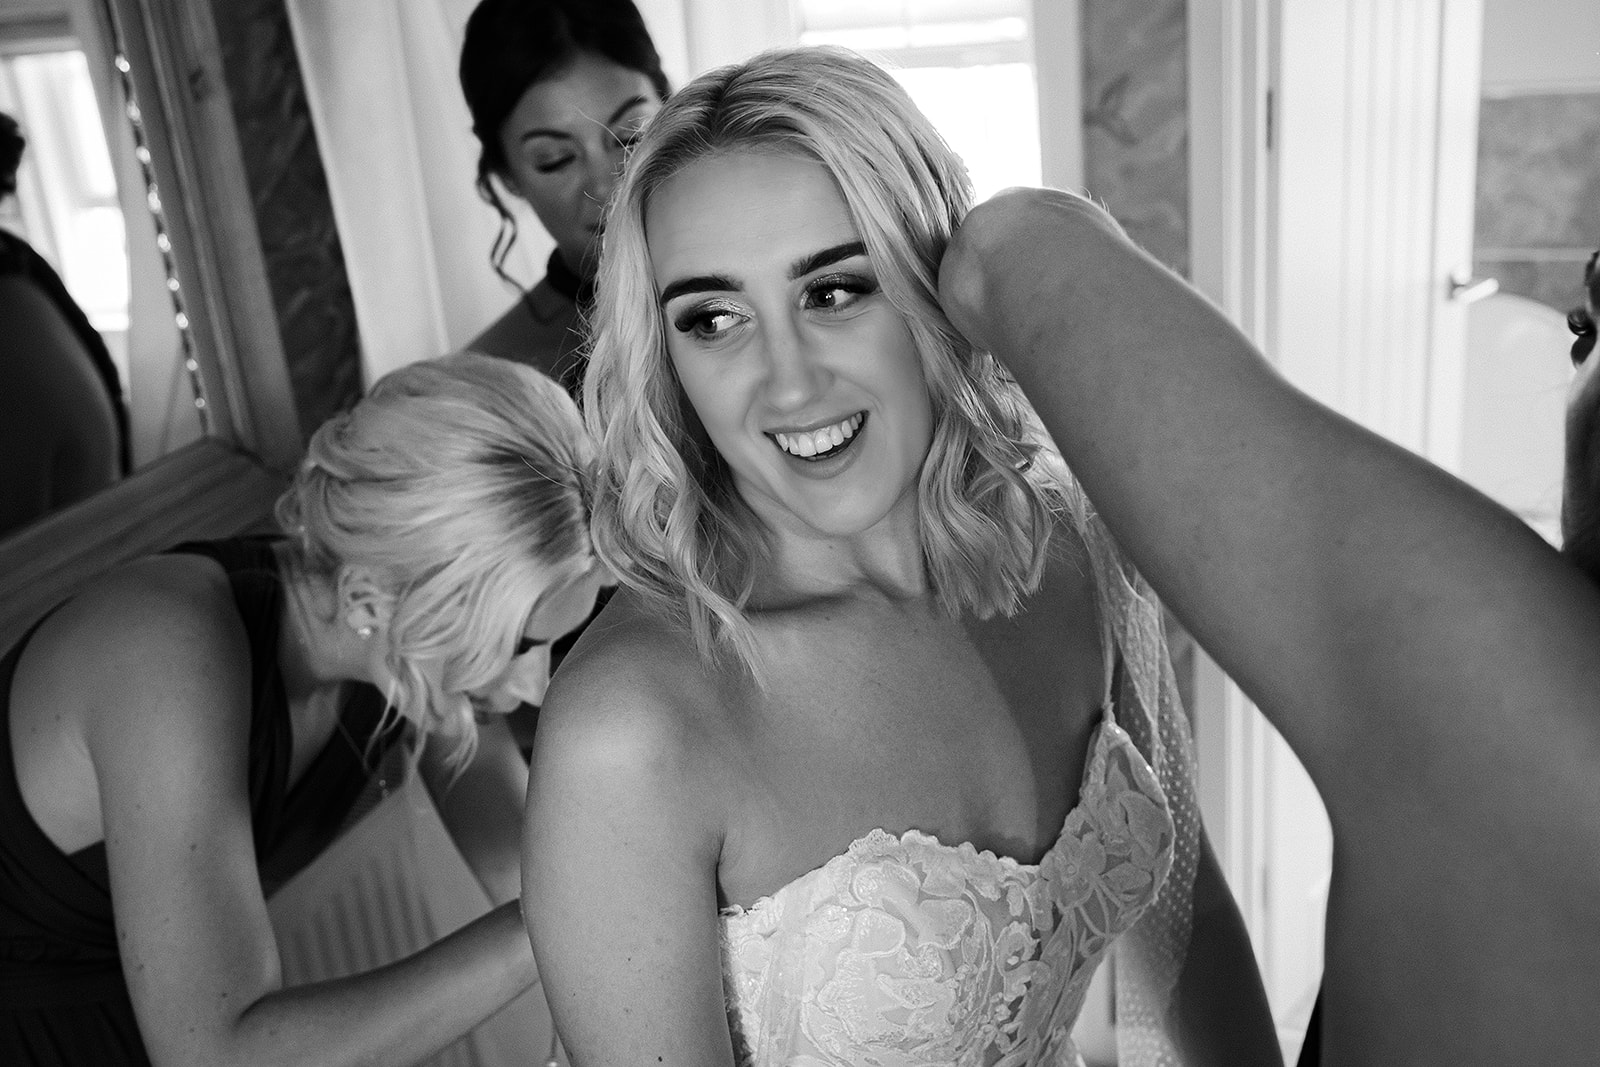 A bride getting ready for her wedding, with bridesmaids helping fasten the back of her wedding dress. A black and white photo by Tracey Warbey Photography